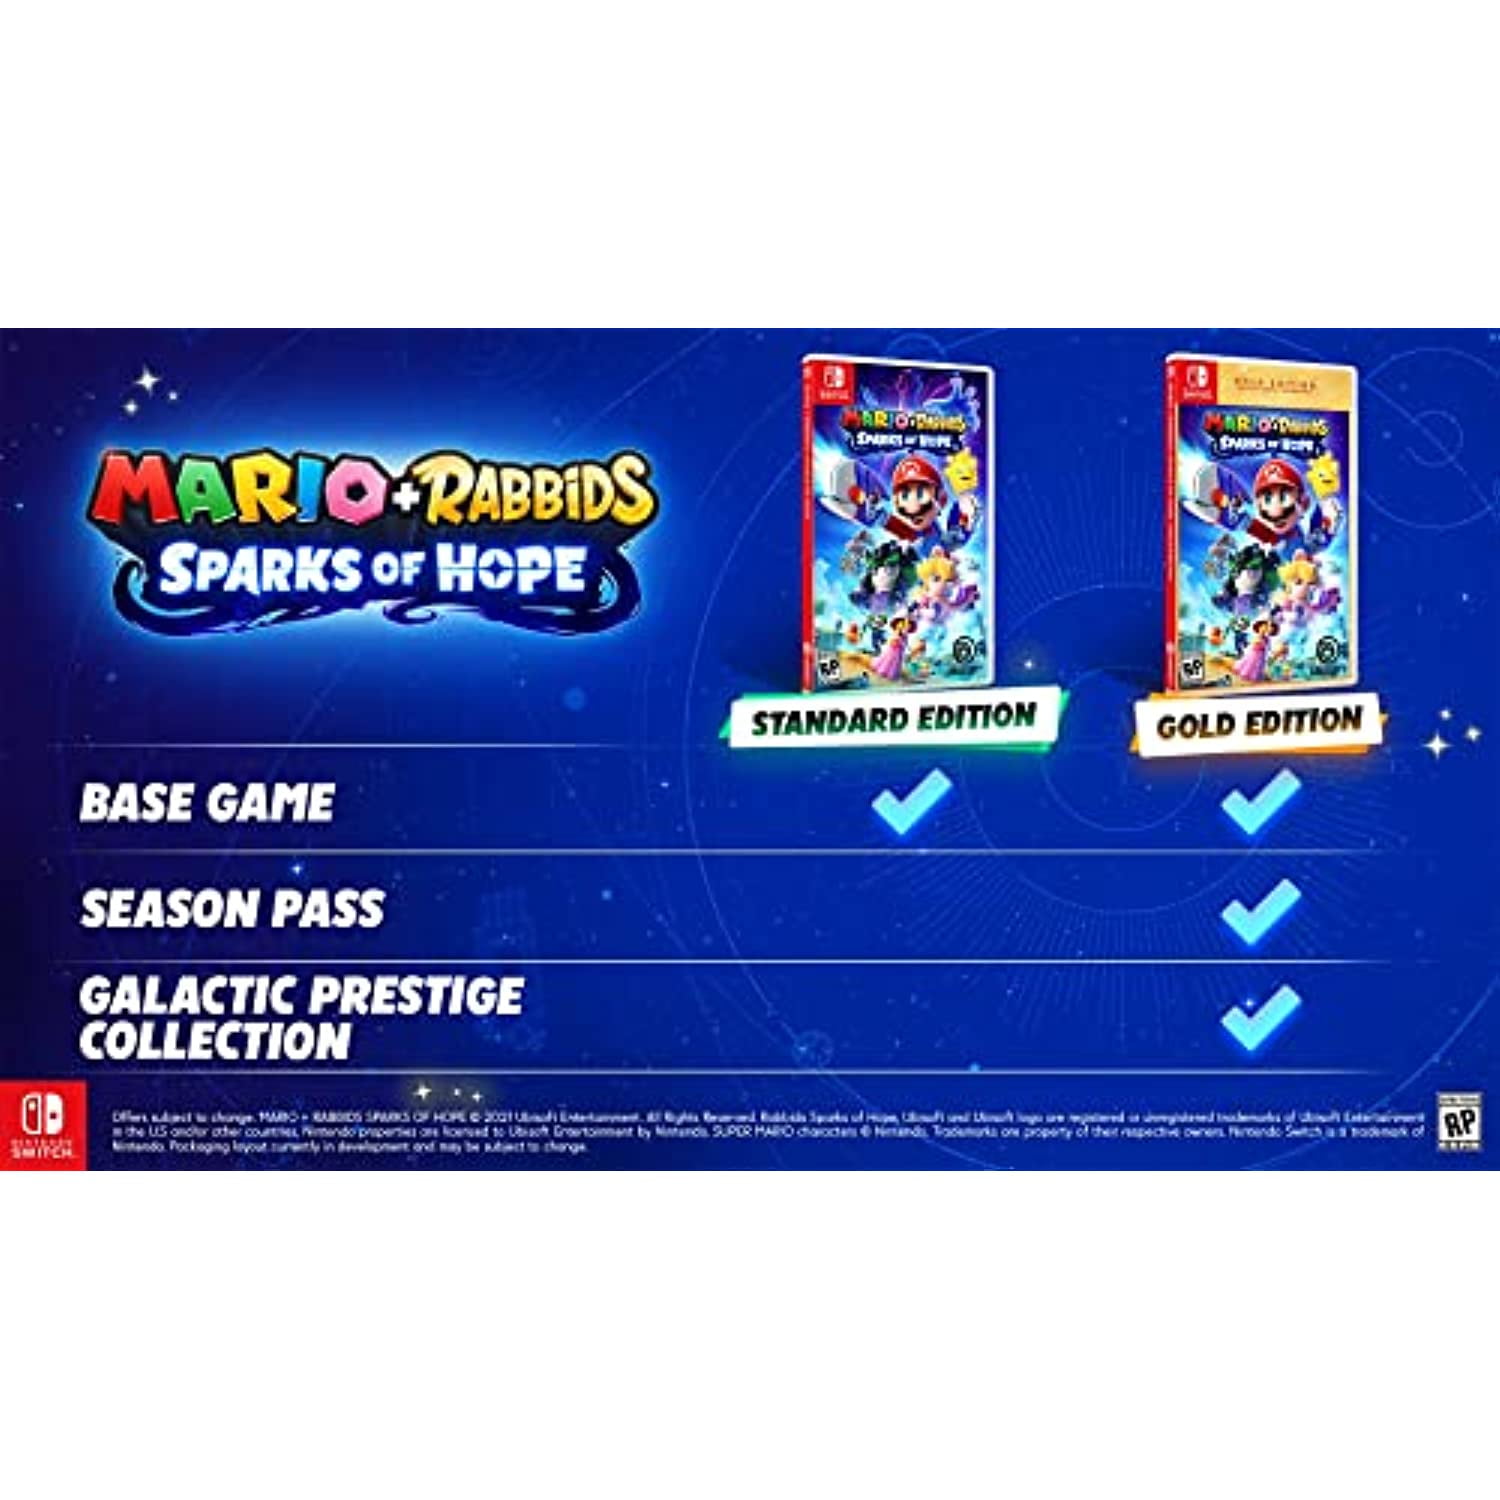 Mario + Rabbids Sparks of Hope (Limited Galactic Edition Deluxe